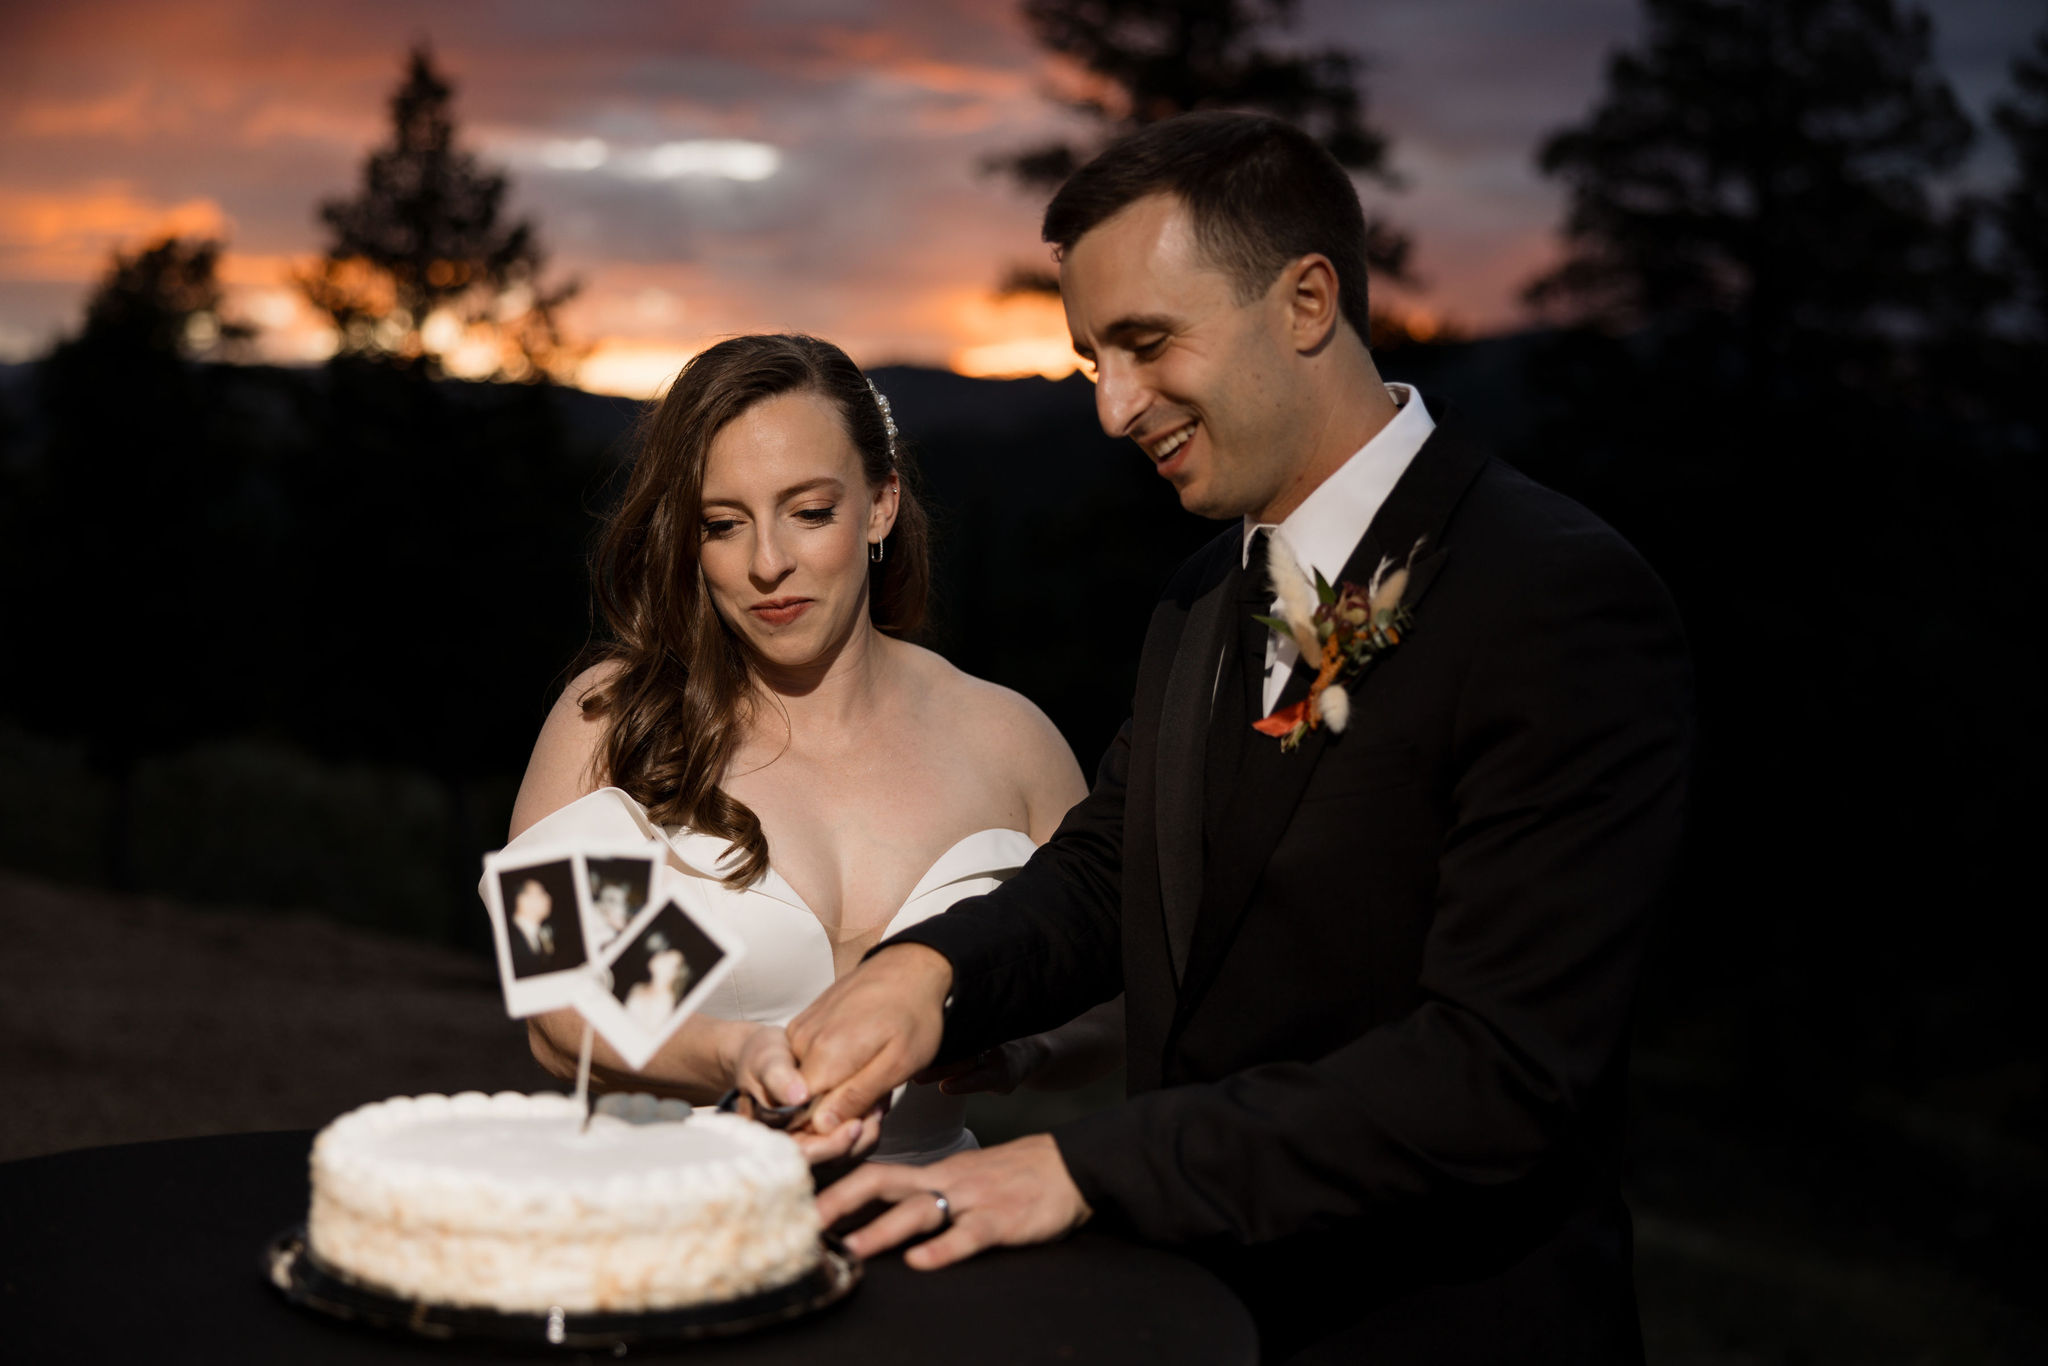 bride and groom cut cake in front of the sunset during their mountain top micro wedding in colorado.